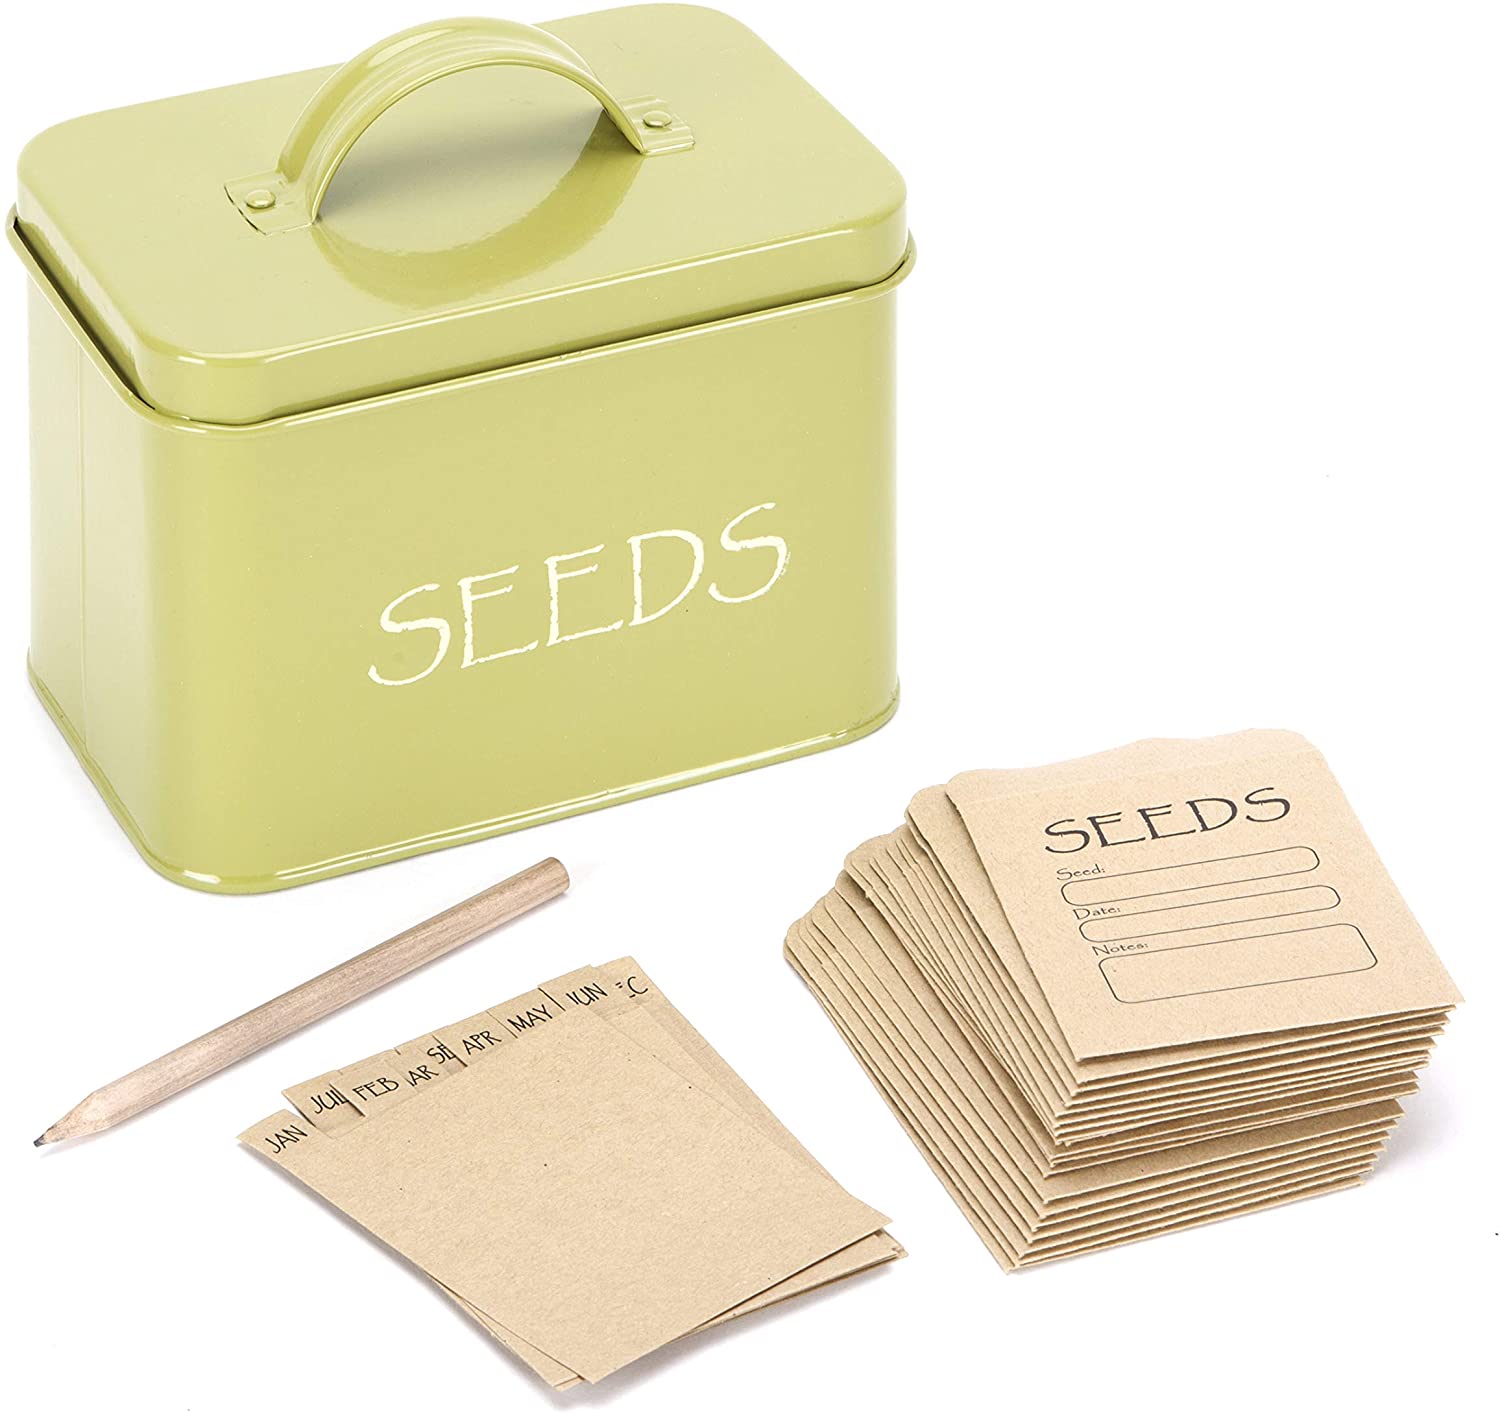 mothers-day-gardening-gifts-cocktail-seed-box